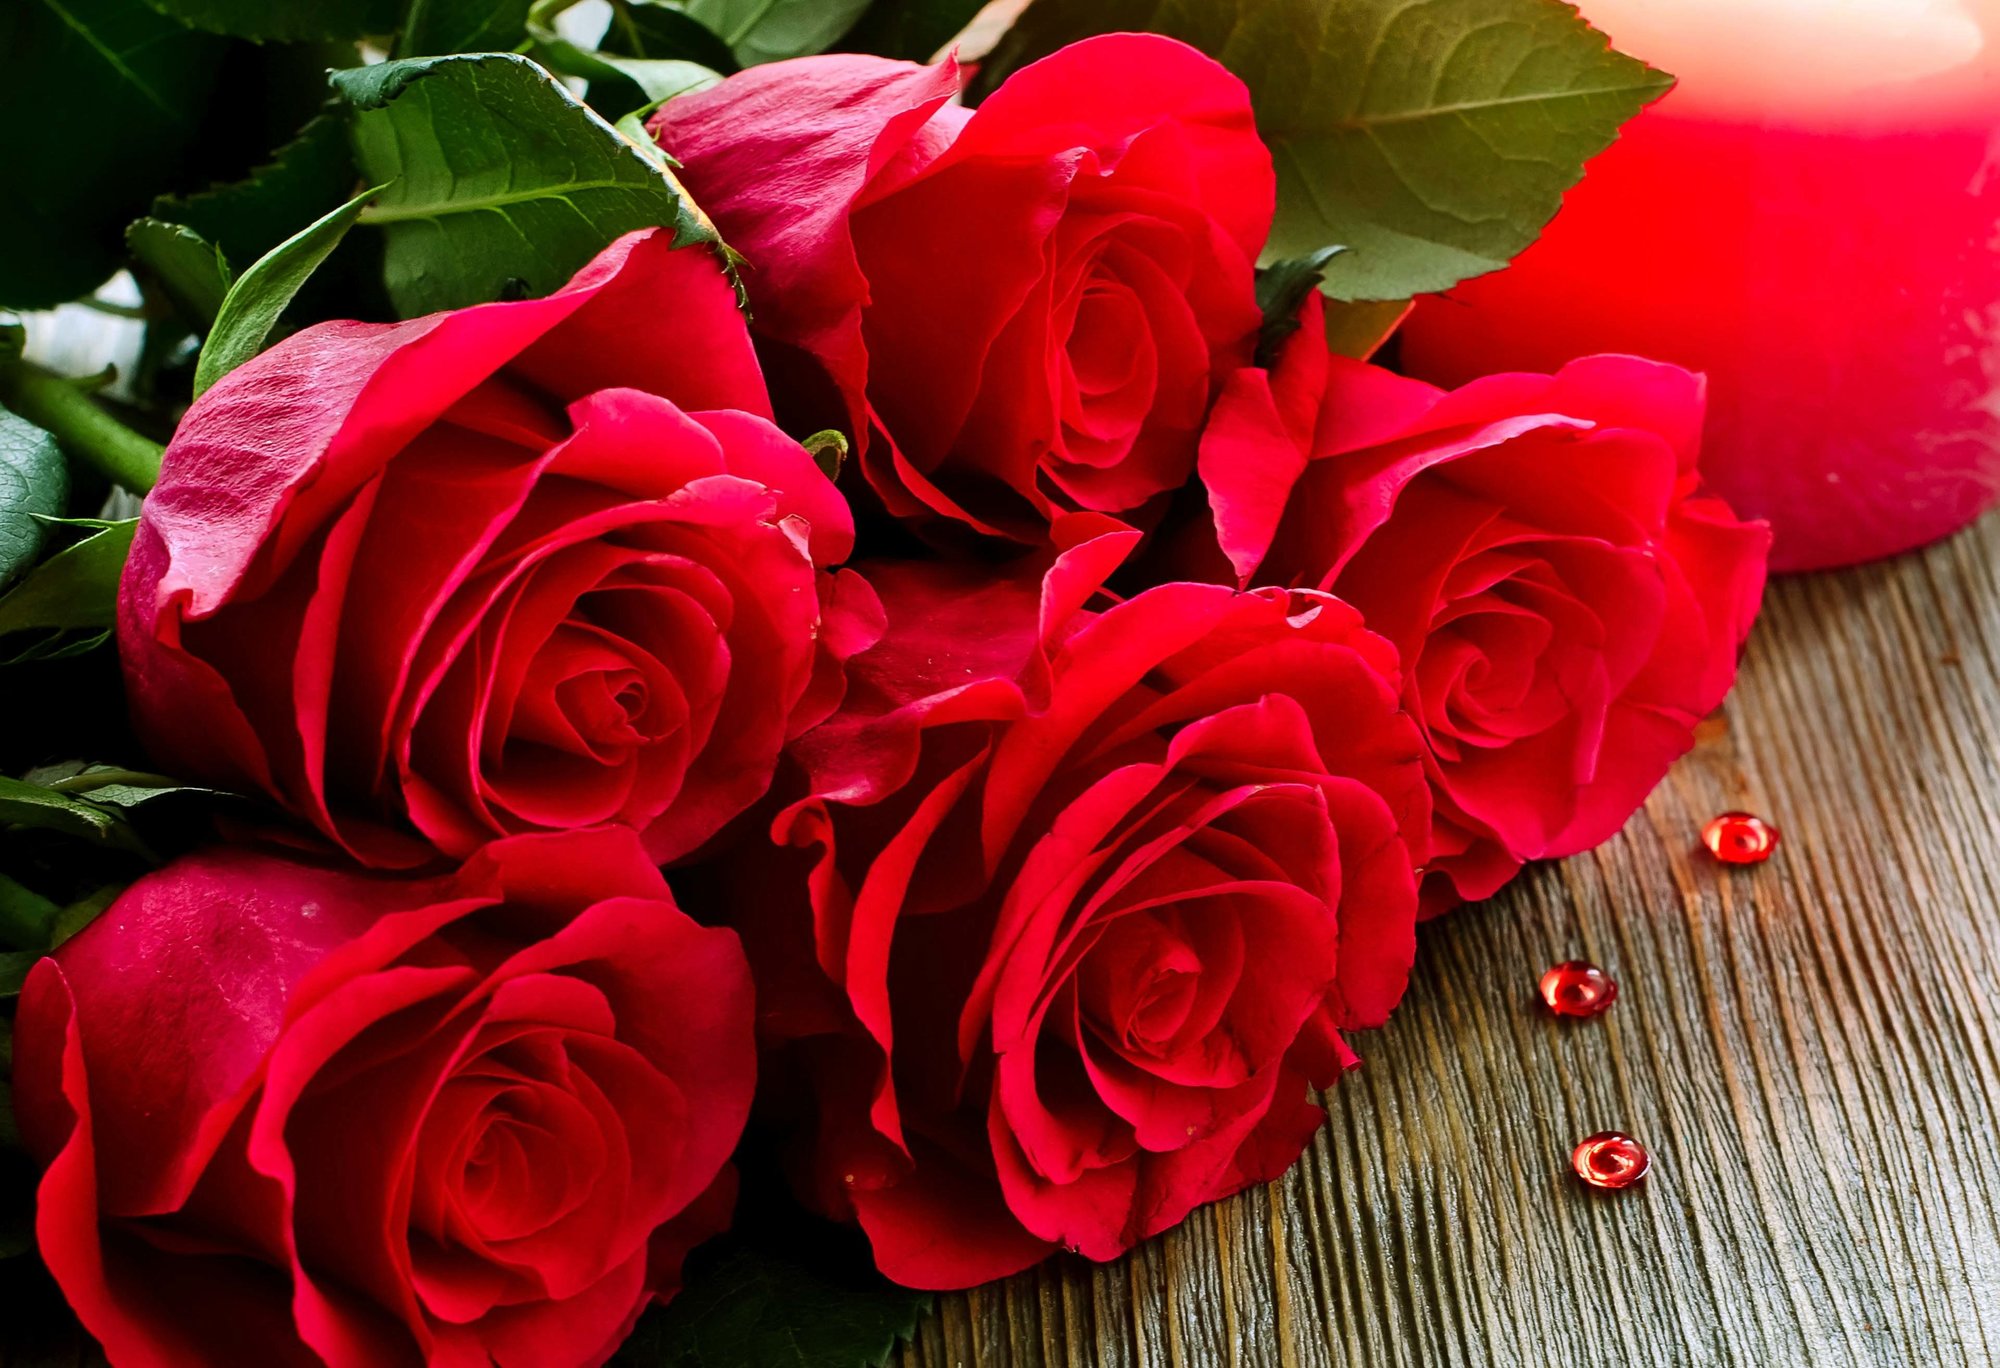 red-roses-images-15.jpg